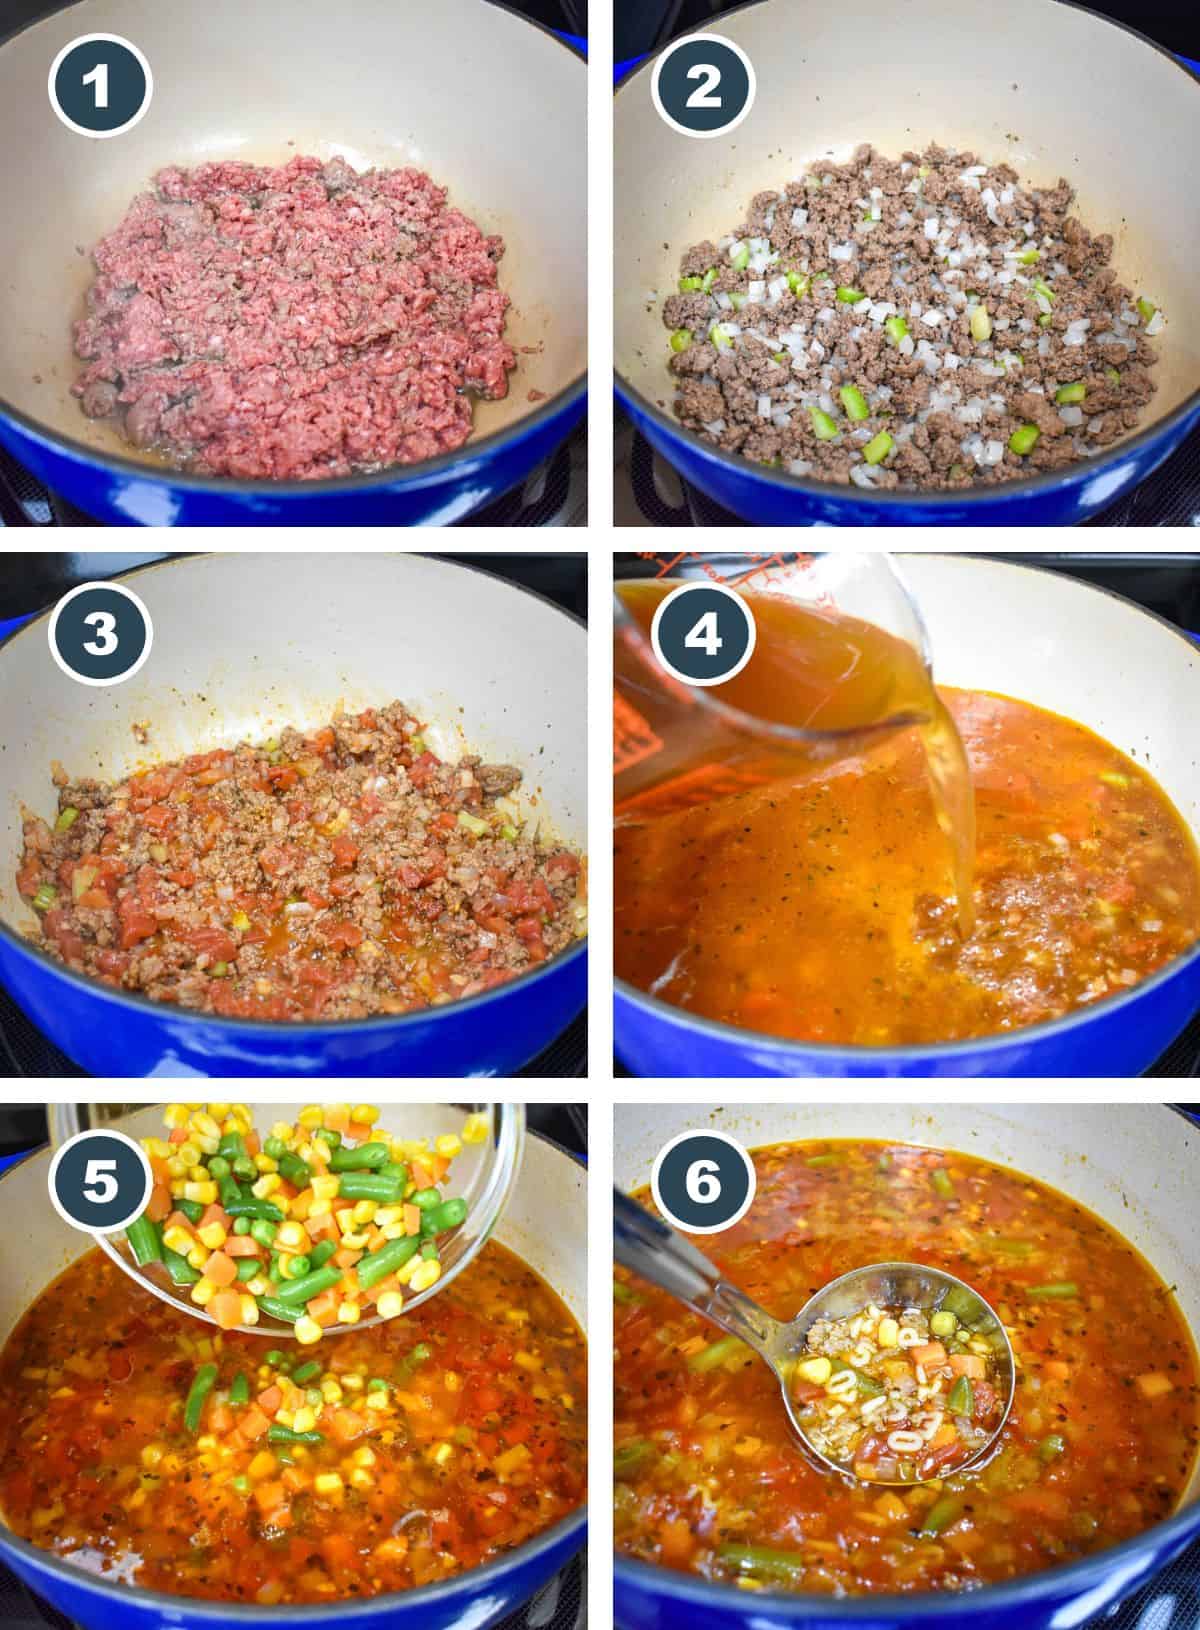 A collage of six images showing the progress of making the alphabet soup.